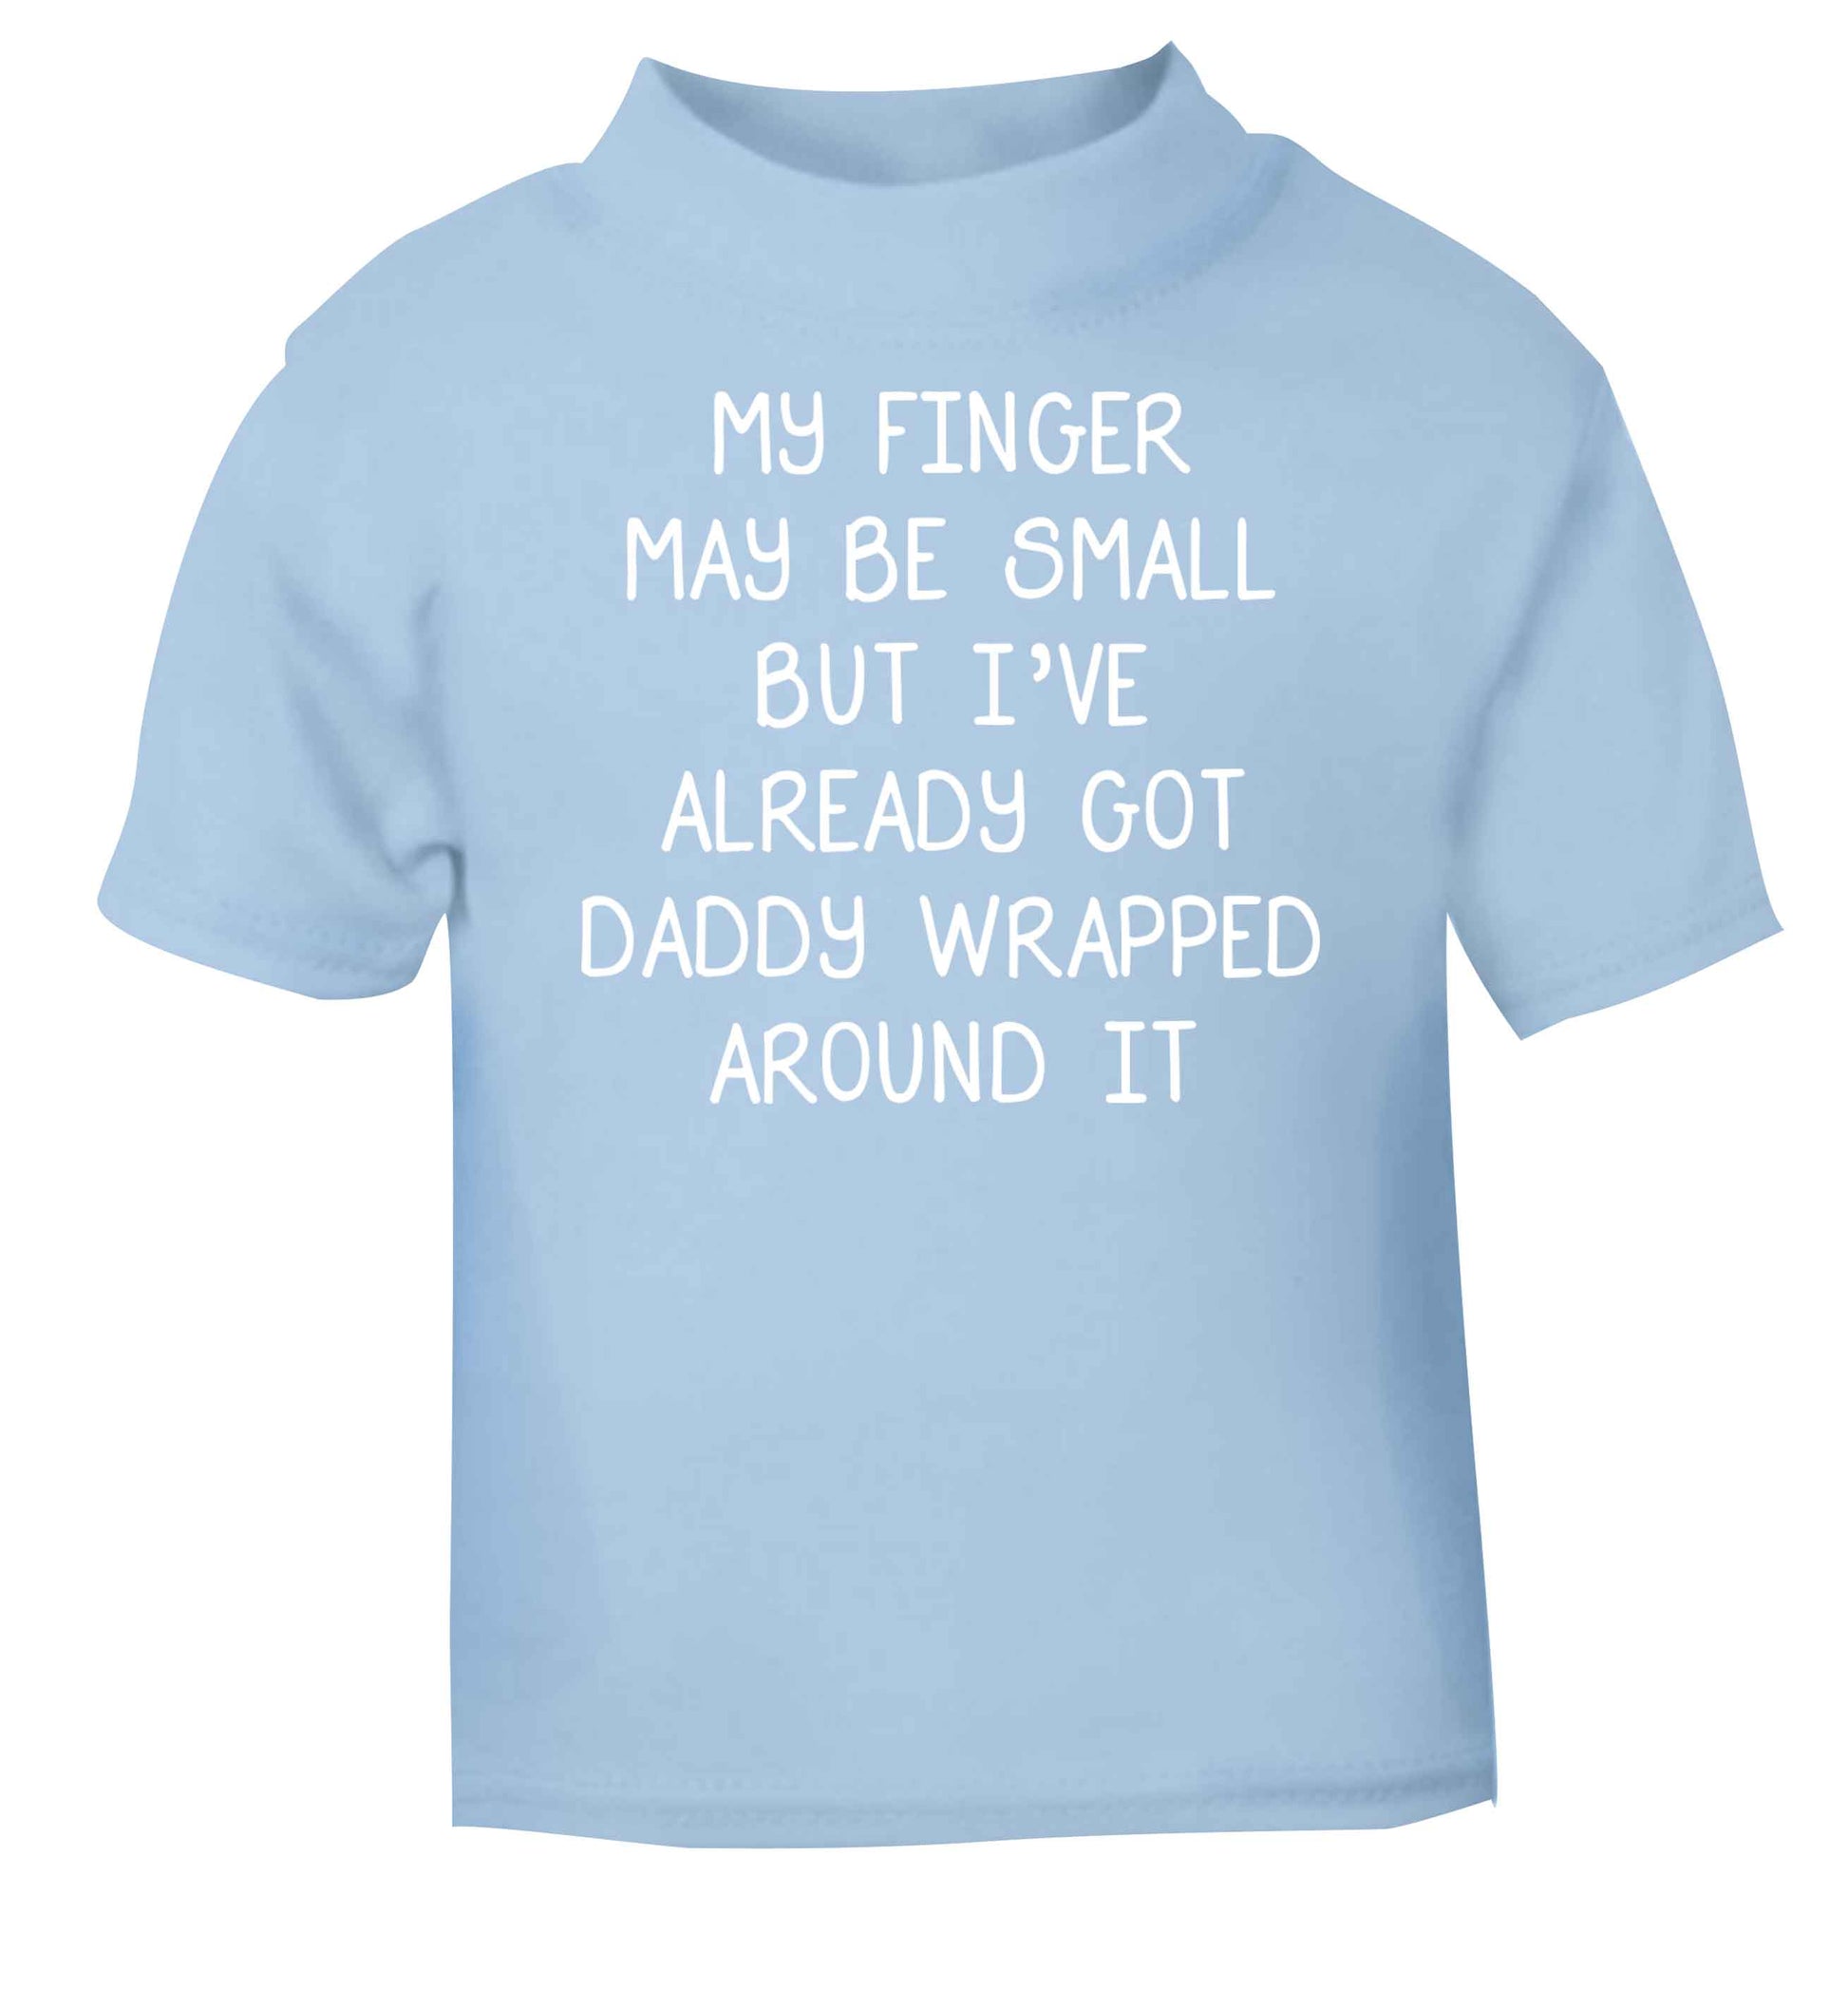 My finger may be small but I've already got daddy wrapped around it light blue baby toddler Tshirt 2 Years